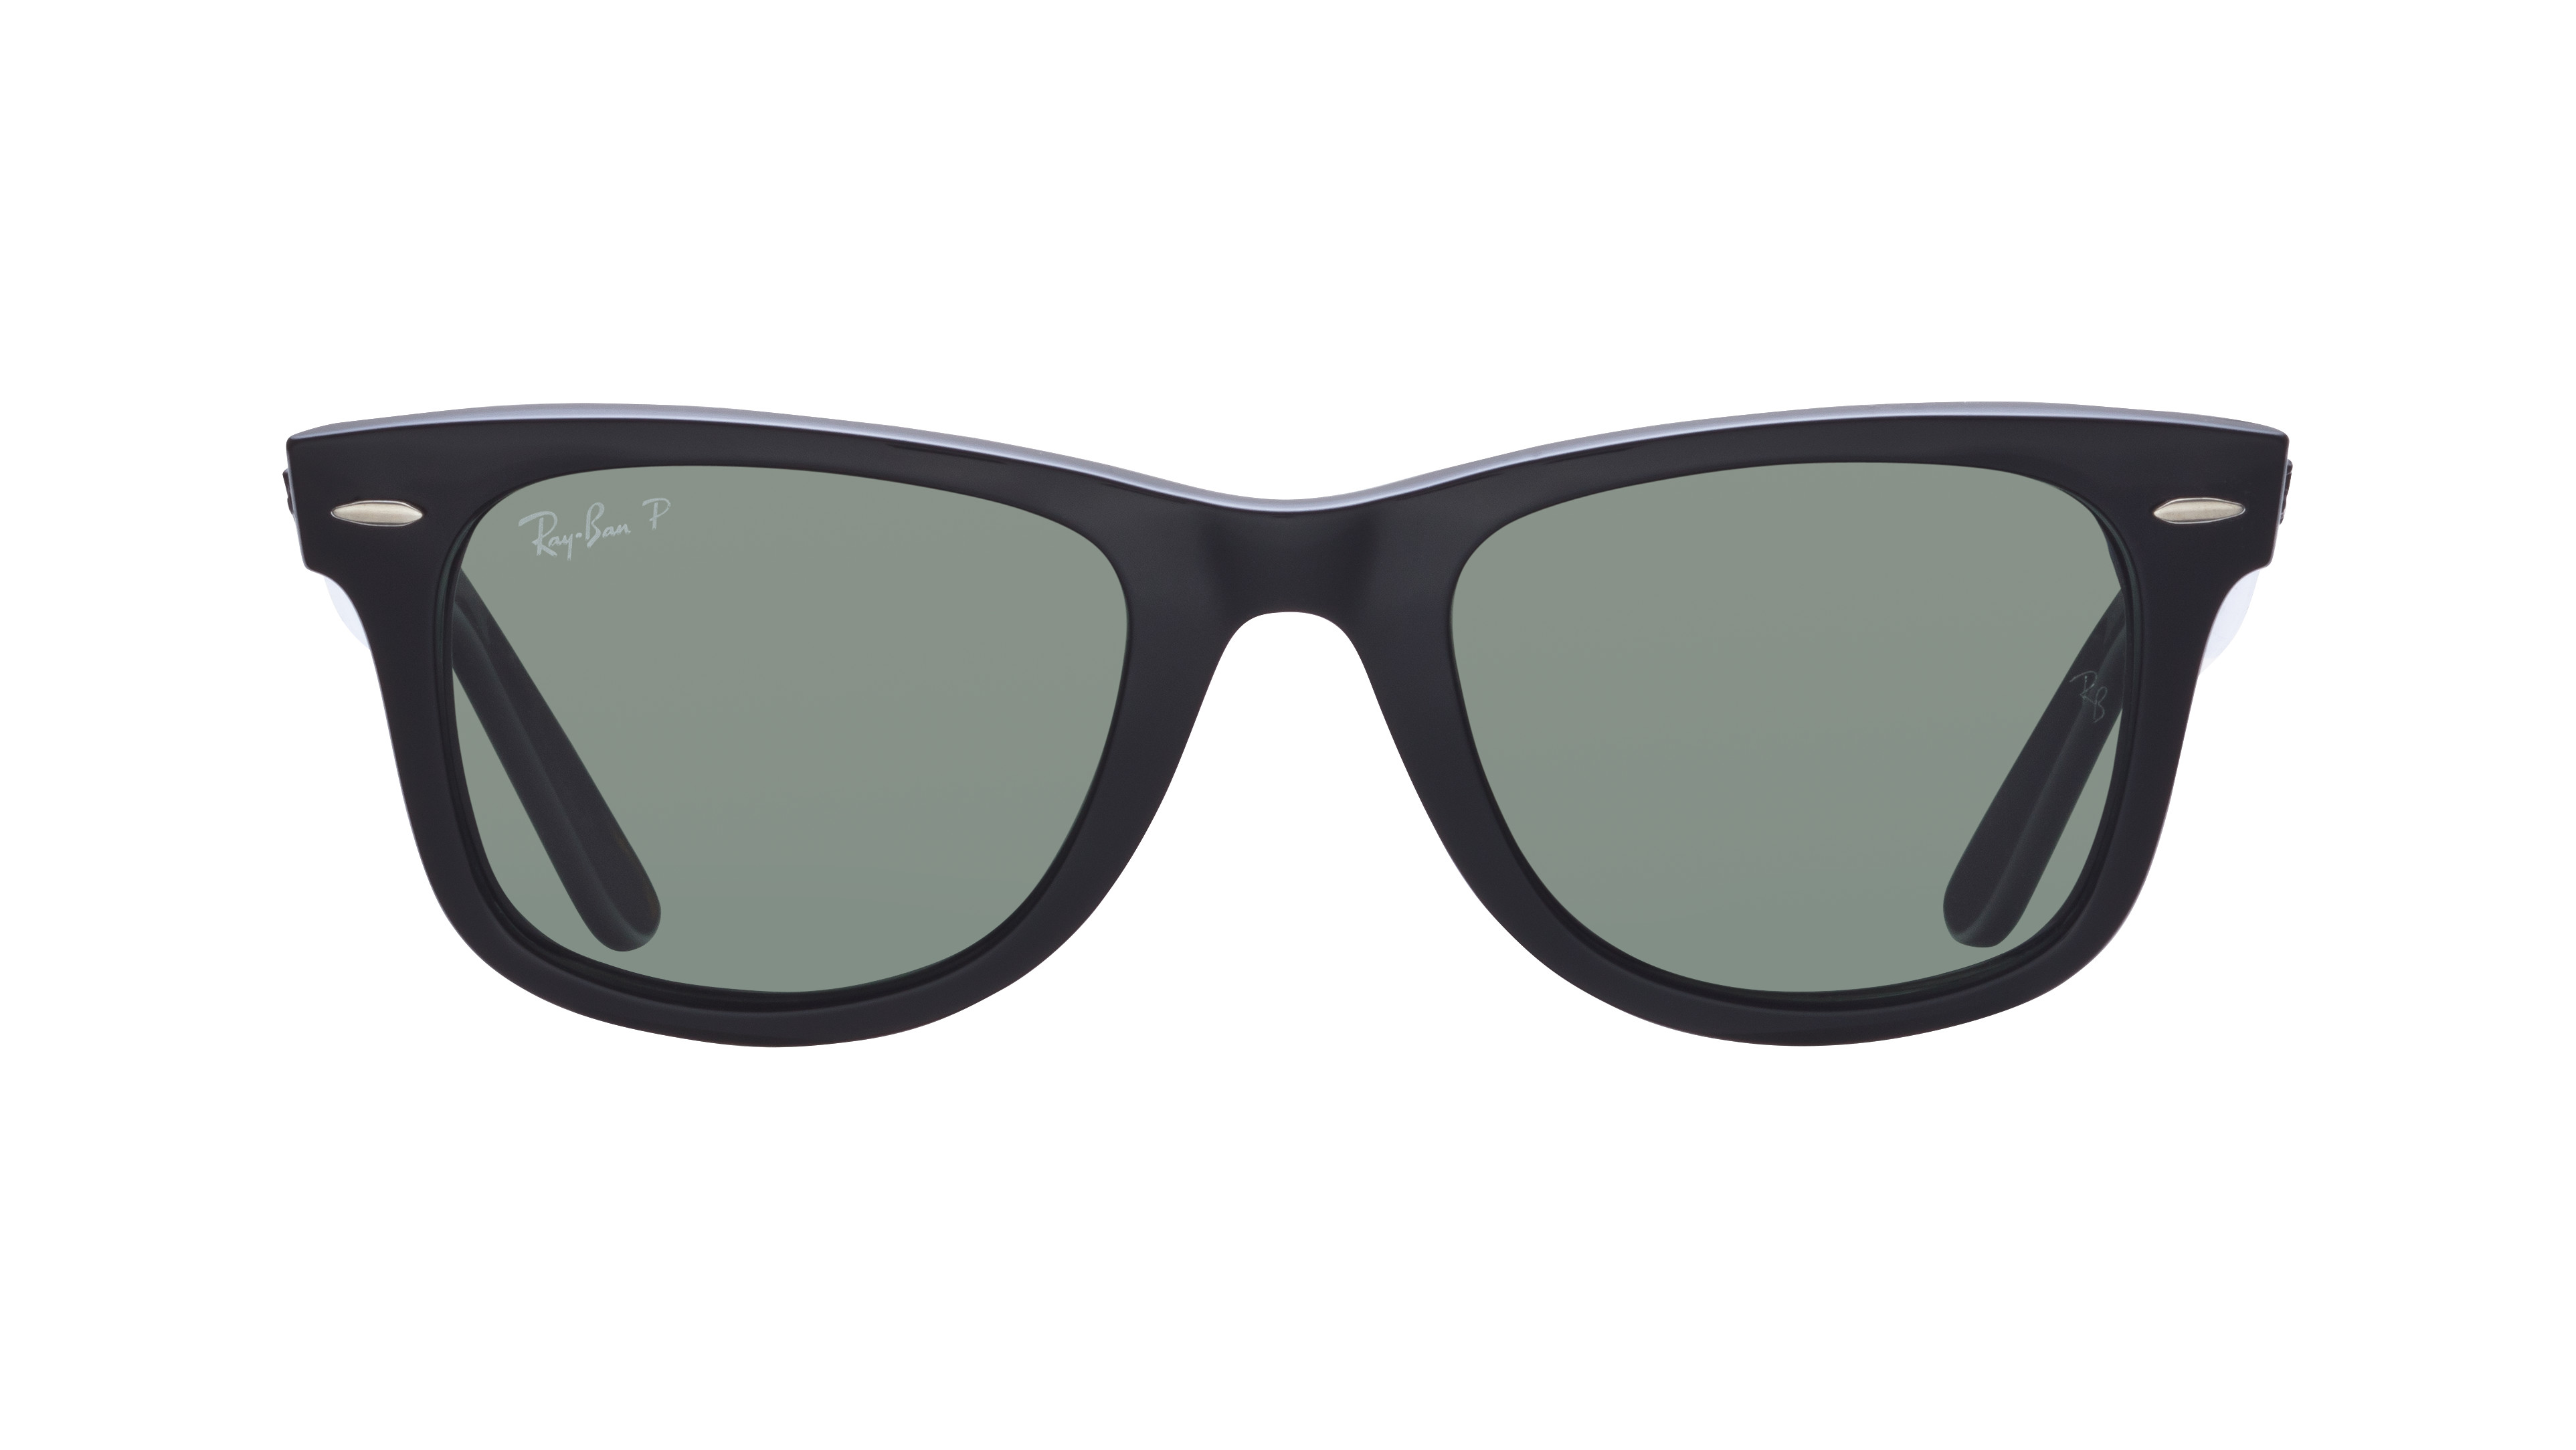 [products.image.front] Ray-Ban Wayfarer 0RB2140 901/58 Sonnenbrille